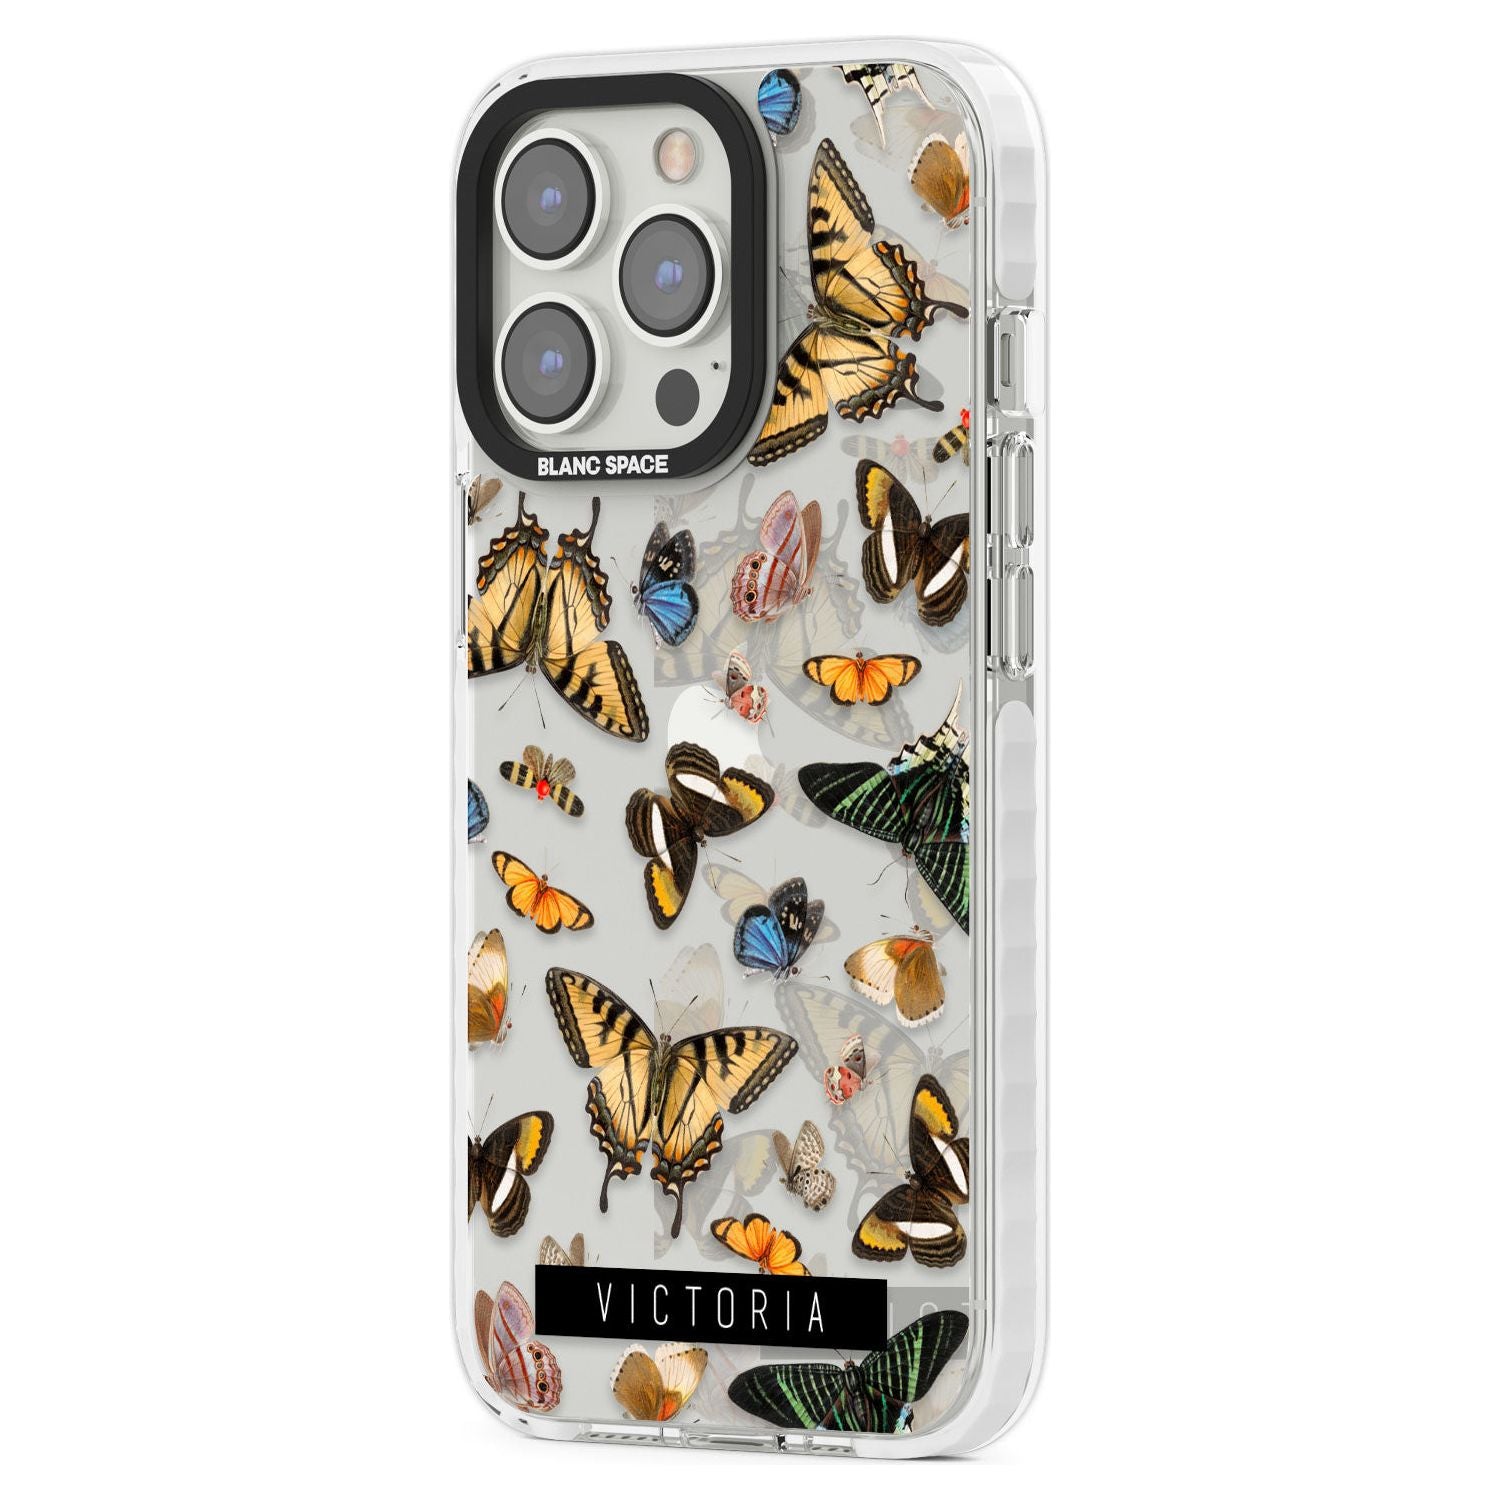 Personalised Photorealistic Butterfly Custom Phone Case iPhone 15 Pro Max / Black Impact Case,iPhone 15 Plus / Black Impact Case,iPhone 15 Pro / Black Impact Case,iPhone 15 / Black Impact Case,iPhone 15 Pro Max / Impact Case,iPhone 15 Plus / Impact Case,iPhone 15 Pro / Impact Case,iPhone 15 / Impact Case,iPhone 15 Pro Max / Magsafe Black Impact Case,iPhone 15 Plus / Magsafe Black Impact Case,iPhone 15 Pro / Magsafe Black Impact Case,iPhone 15 / Magsafe Black Impact Case,iPhone 14 Pro Max / Black Impact Case